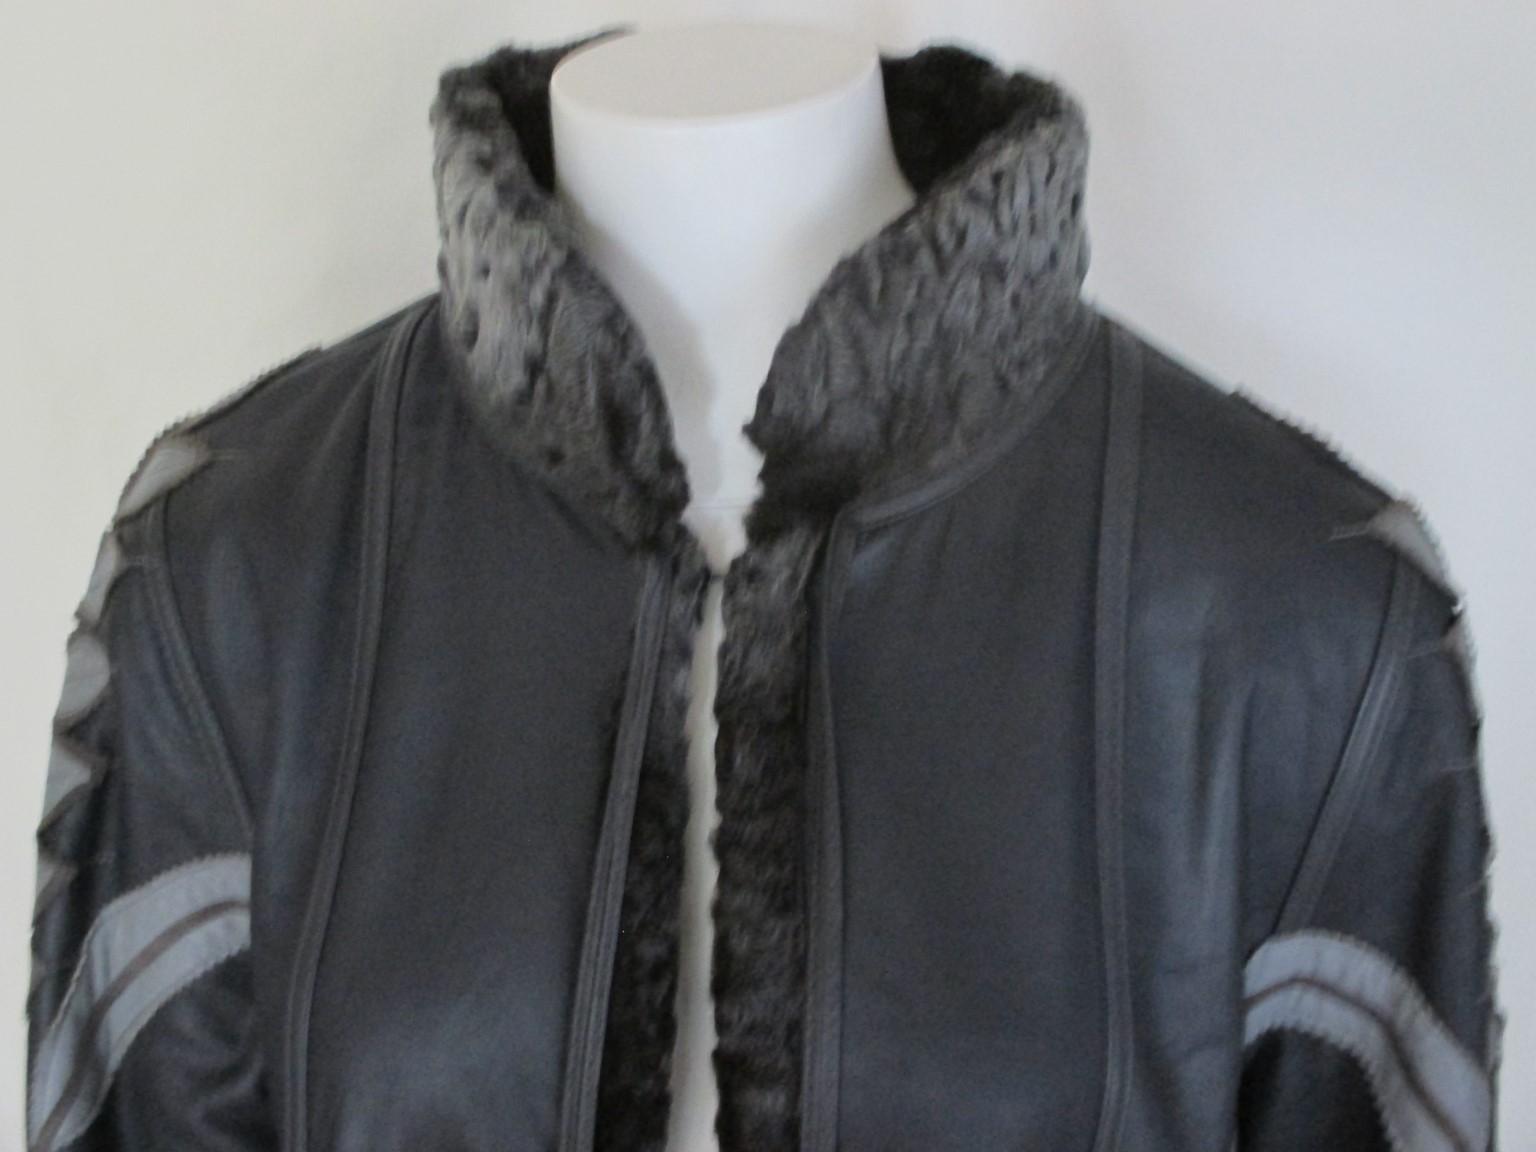 This exclusive vintage leather coat is reversible to broadtail lamb fur.

We offer more Broadtail, Astrakhan, Persian lamb fur items, see our frontstore.

Details:
With 2 pockets and 4 closing hooks
Decorative leaves appliques
Sleeves are 64 cm and